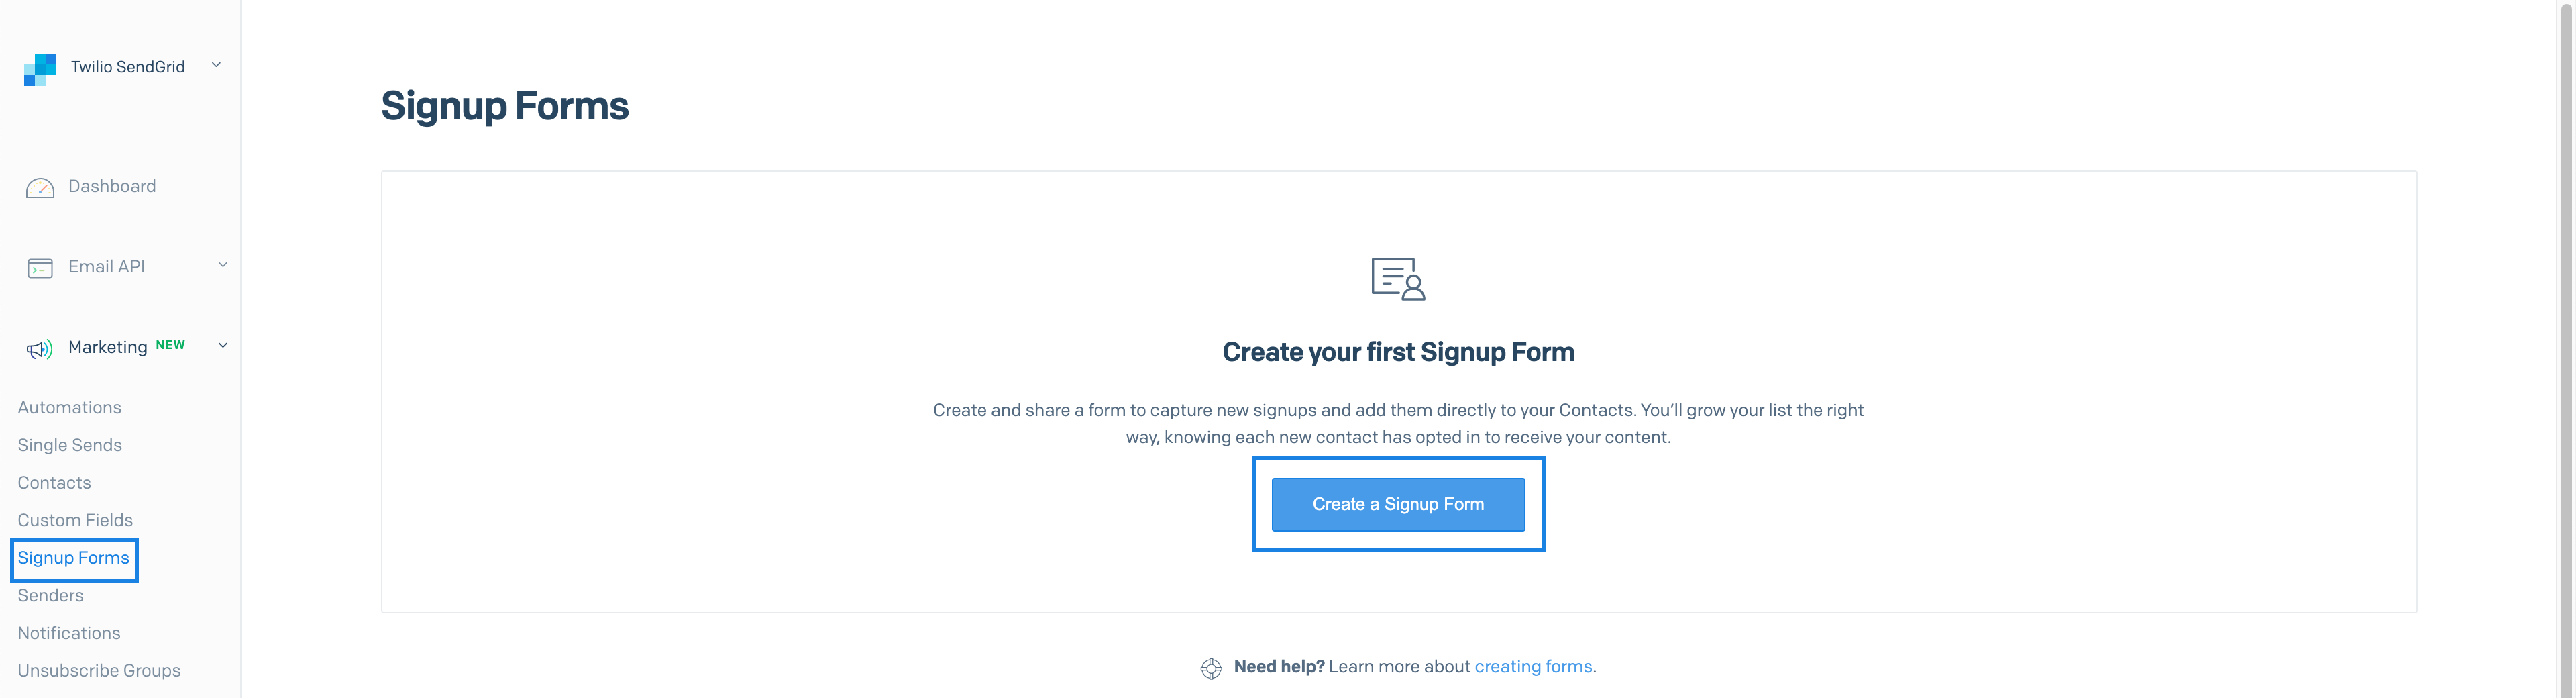 The Signup Forms page with a 'Create a Signup Form' button.